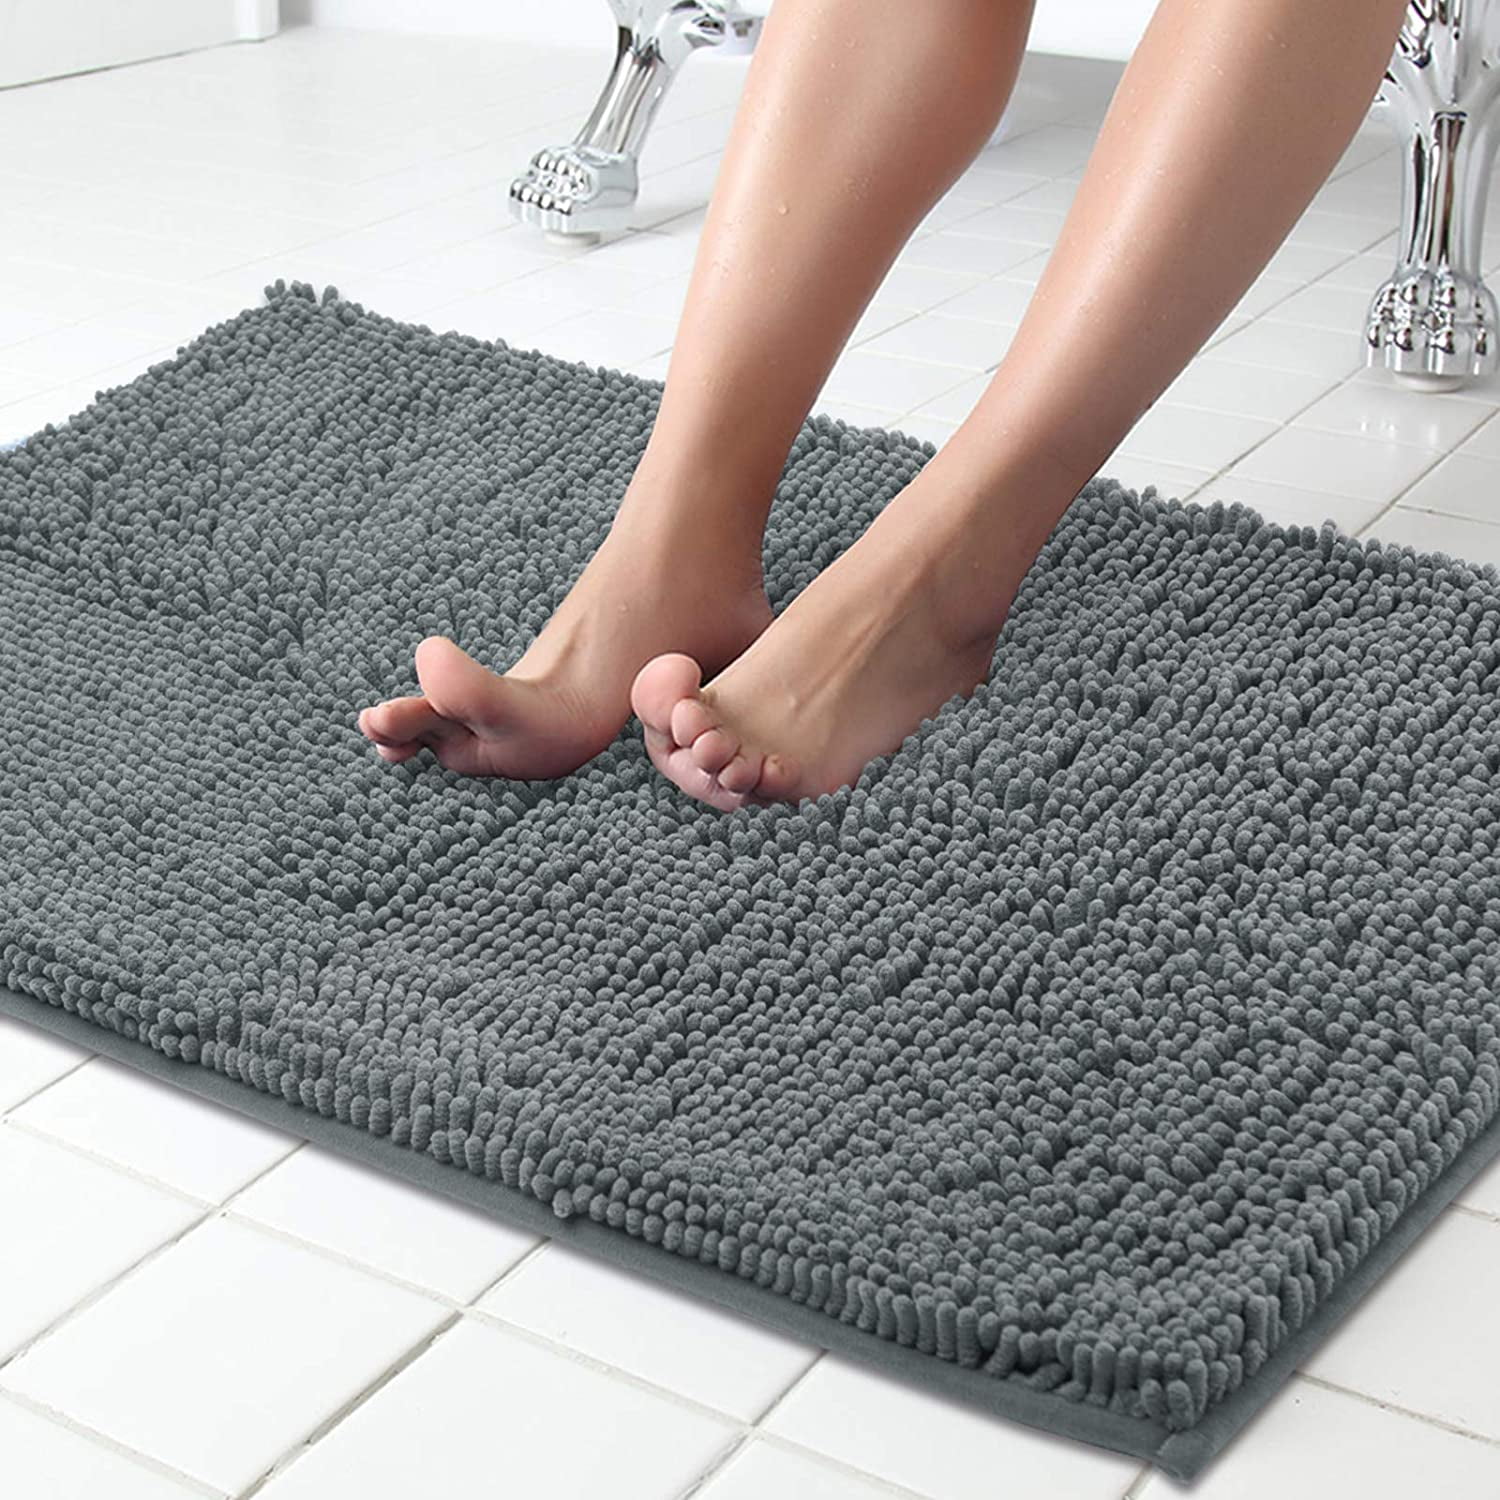  RAJRANG Bathroom Rug for Kitchen and Spa with Crochet Pattern  Cotton Absorbent Soft Reversible Bath Mat Light Grey Square 24 Inches :  Home & Kitchen